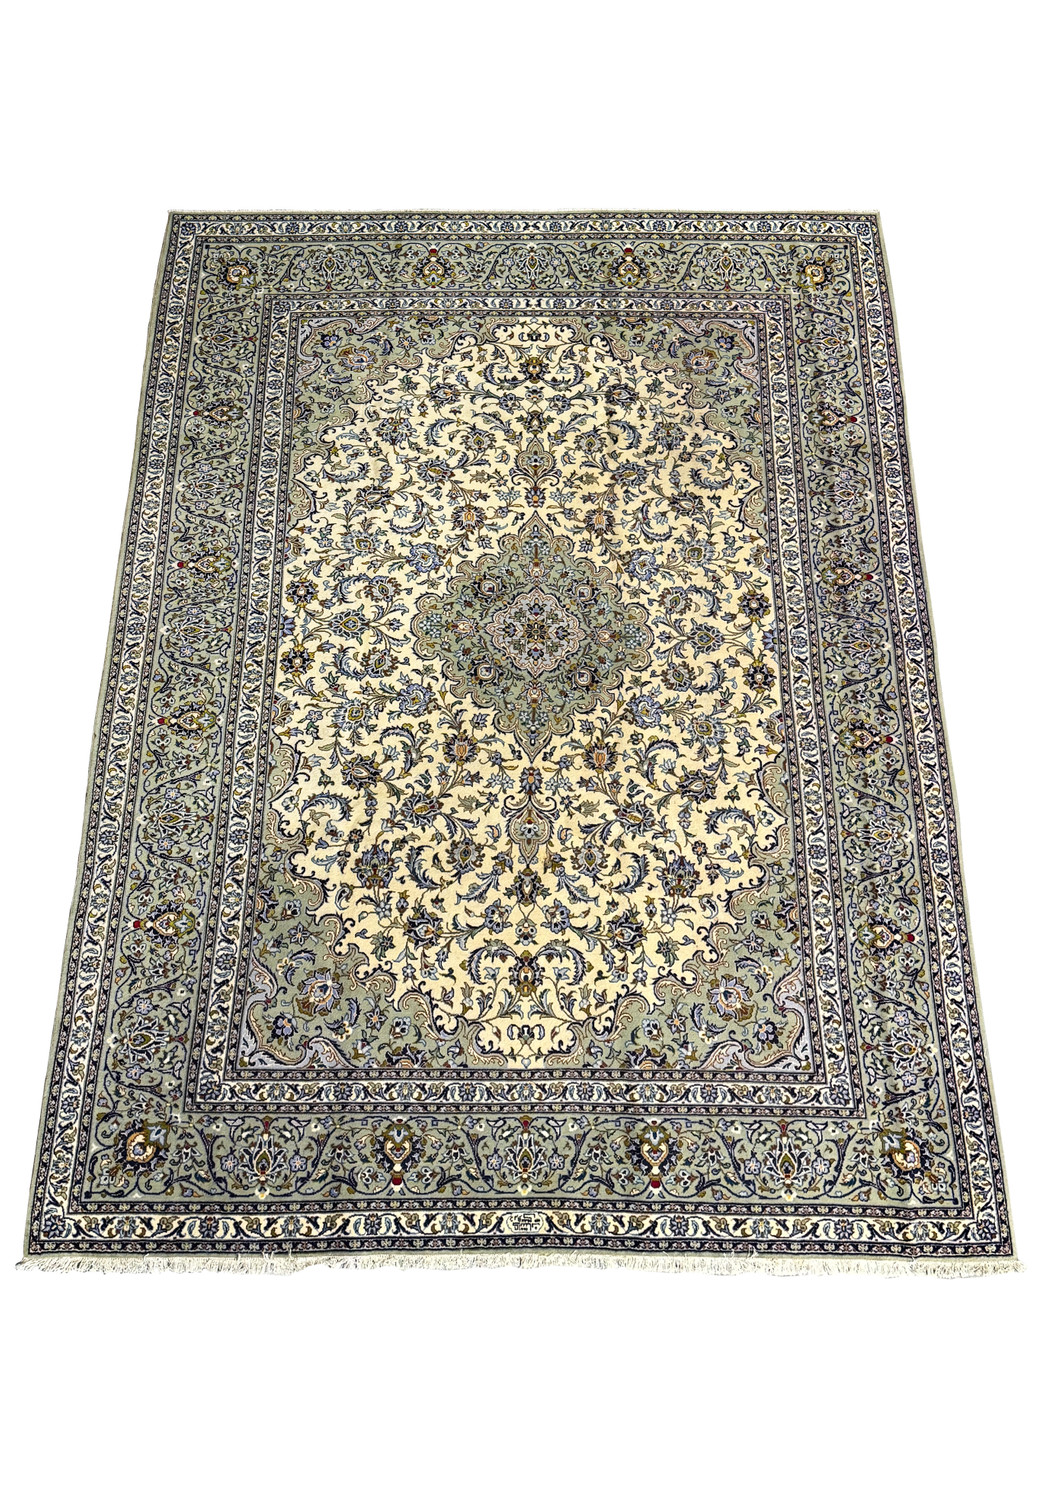 9x12 Persian Kashan rug displayed on the floor, showing intricate patterns and a dominant cream field surrounded by detailed borders